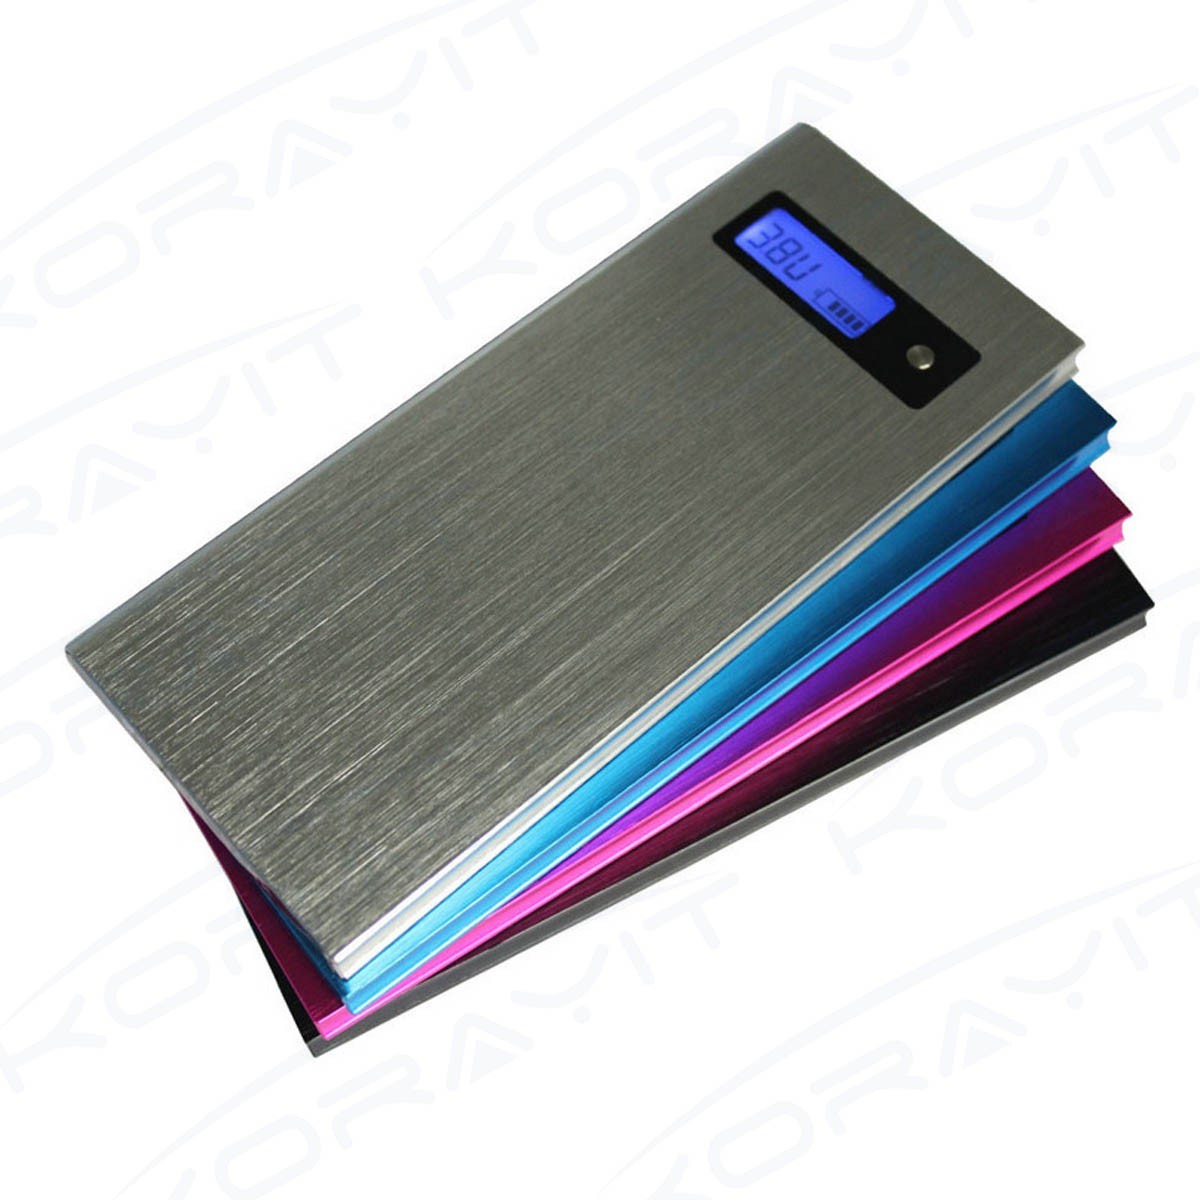 Buy cheap 8000mAh Aluminum Rechargeable Power Bank with LED Display, Promotional Gifts from wholesalers